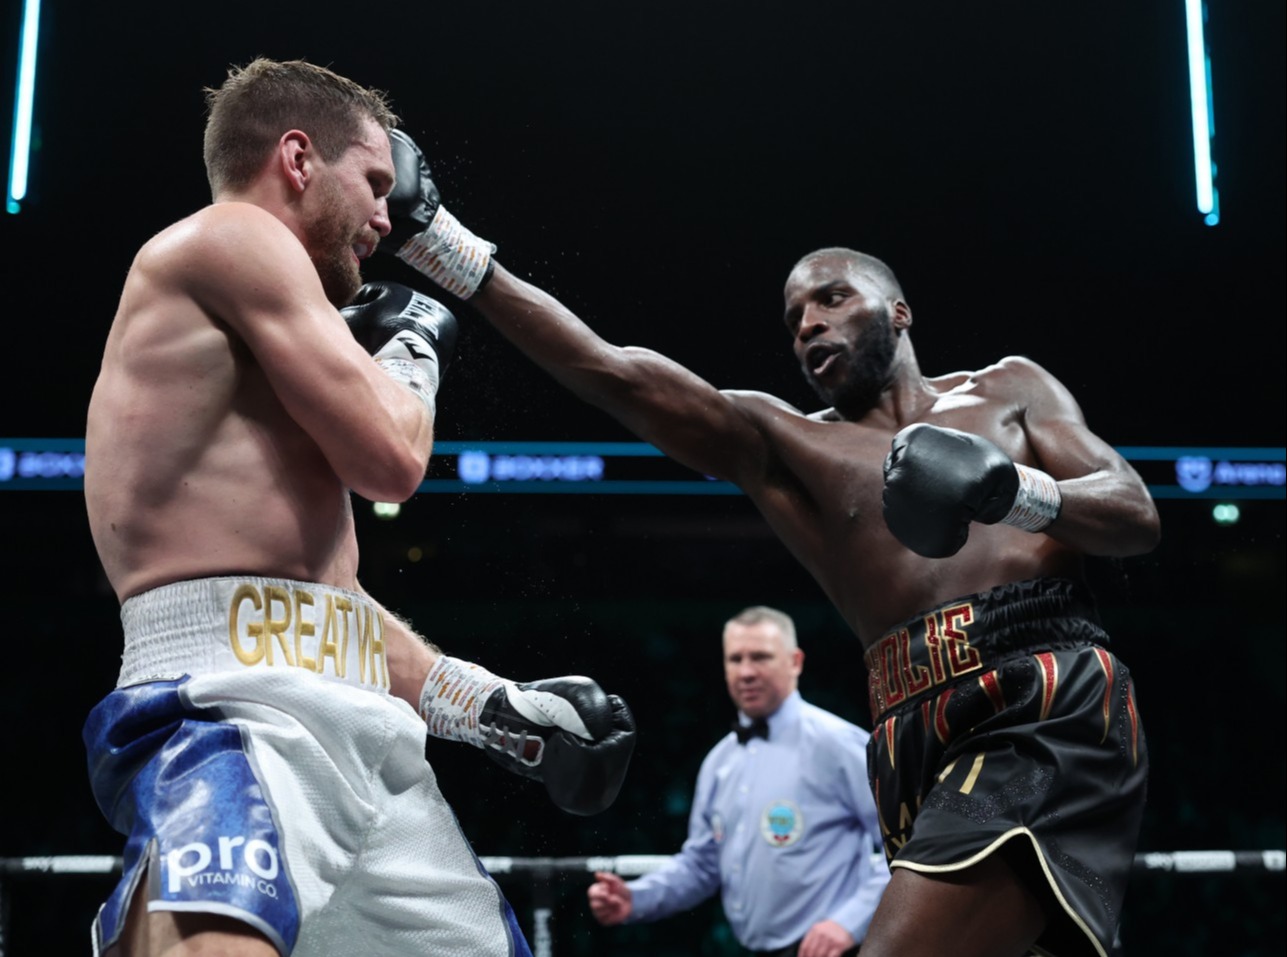 Lawrence Okolie vs Chris Billam-Smith LIVE RESULTS: The Sauce defends title against former colleague – stream, TV, card